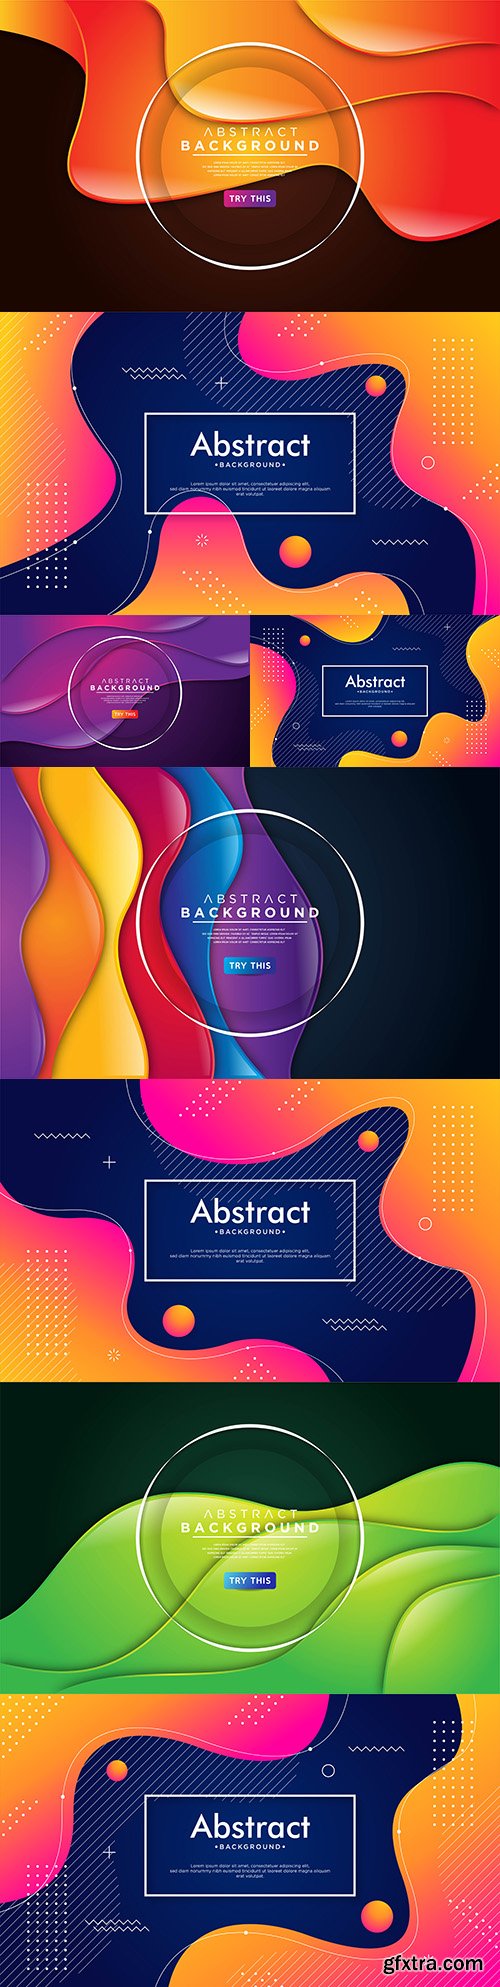 Abstract gradient wave background with colorful shapes 2
